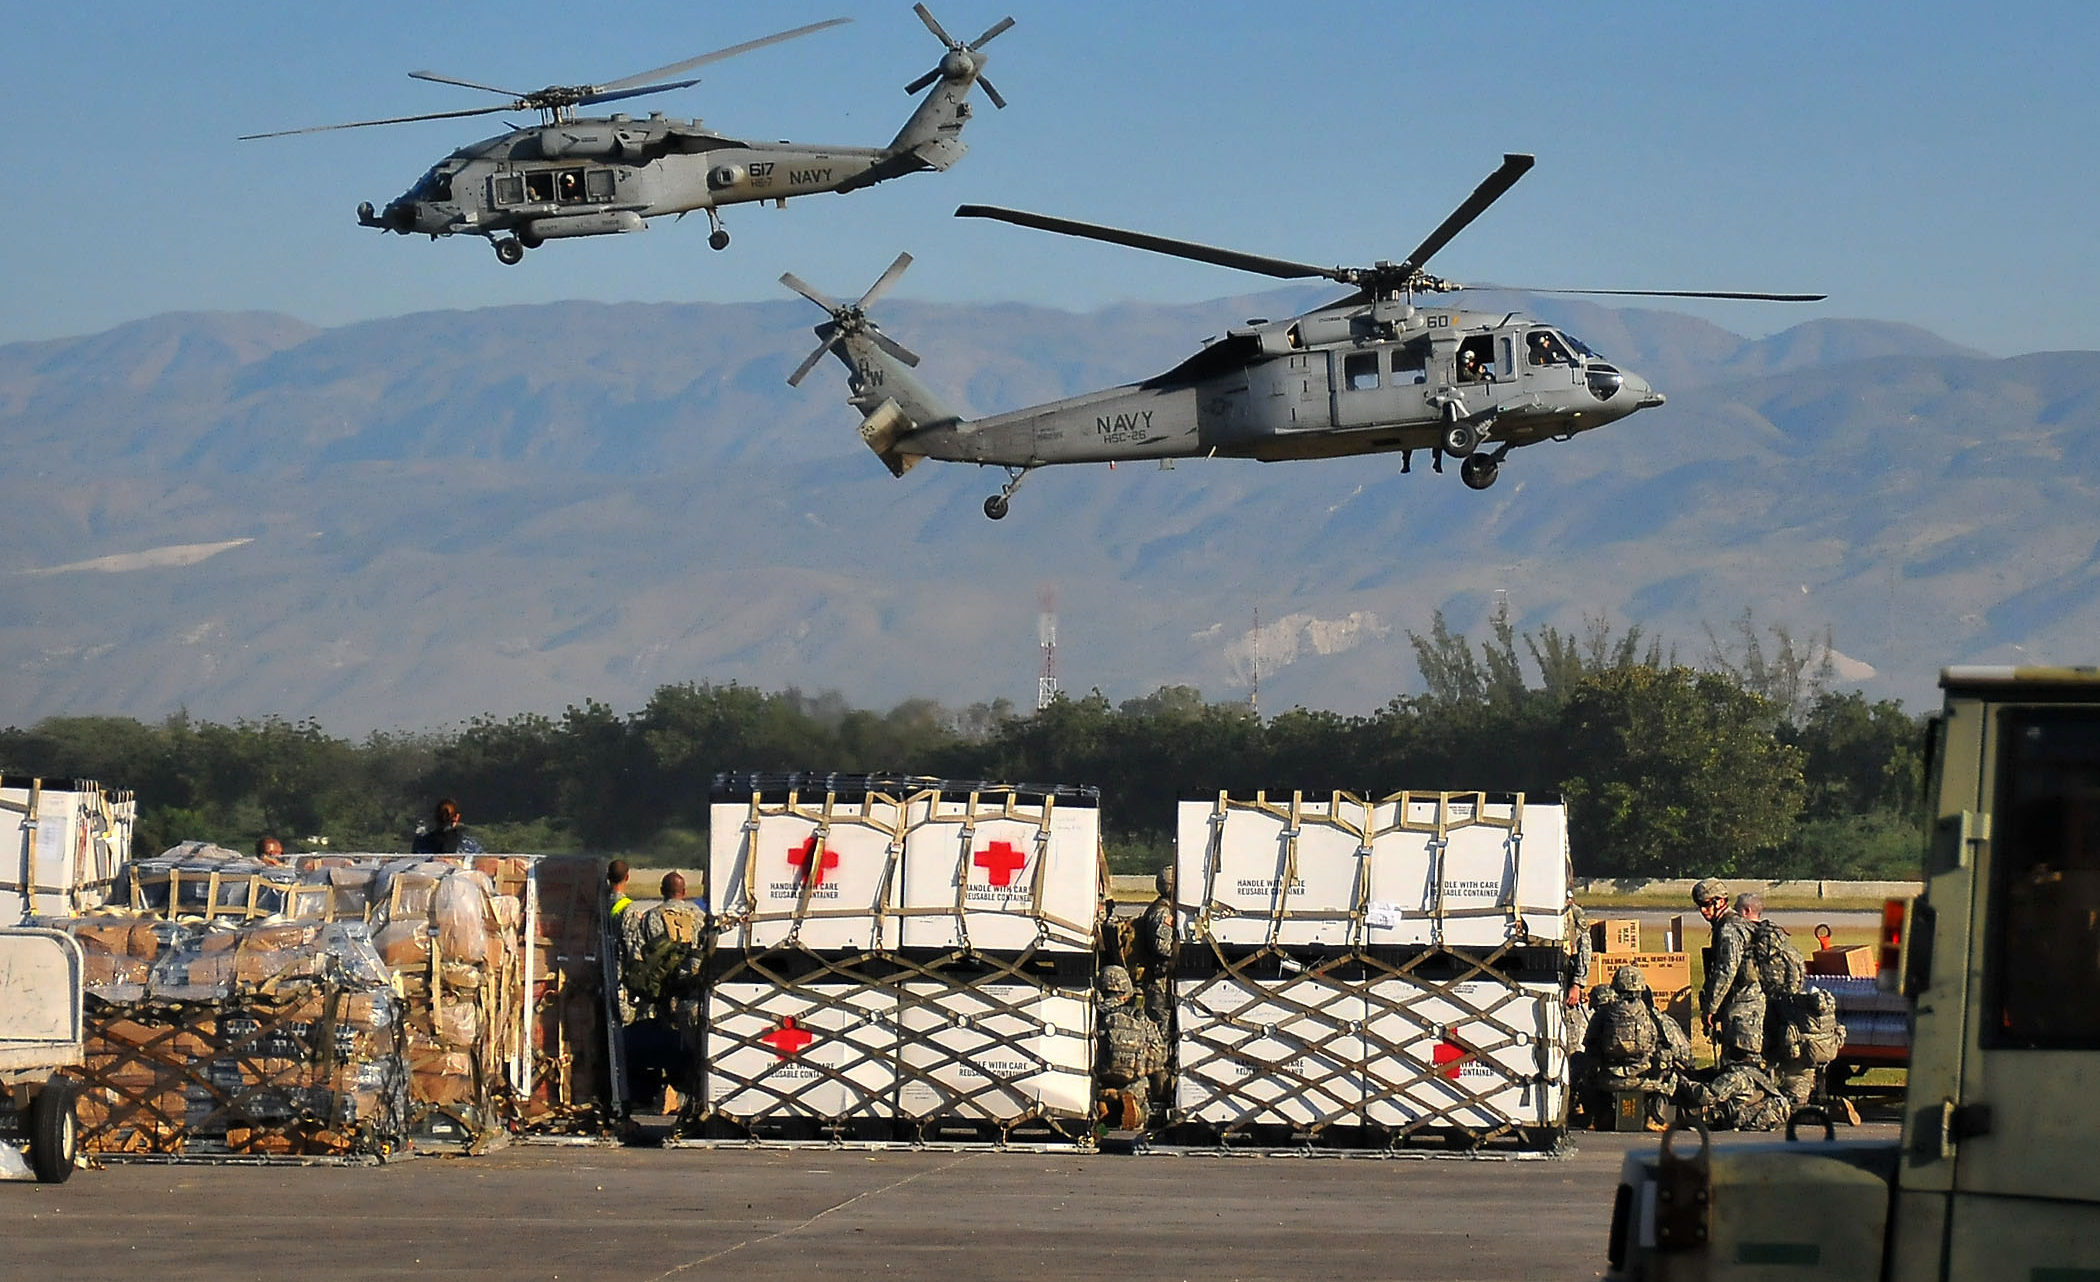 PORT-AU-PRINCE, Haiti  (Jan. 18, 2010) U.S. Navy SH-60F Sea Hawk helicopters from the Nimitz-class aircraft carrier USS Carl Vinson (CVN 70) transport water and supplies from the airport to areas around Port-au-Prince. Carl Vinson and Carrier Air Wing (CVW) 17 are conducting humanitarian and disaster relief operations as part of Operation Unified Response after a 7.0 magnitude earthquake caused severe damage near Port-au-Prince on Jan. 12, 2010. (U.S. Navy photo by Mass Communication Specialist 2nd Class Daniel Barker/Released)